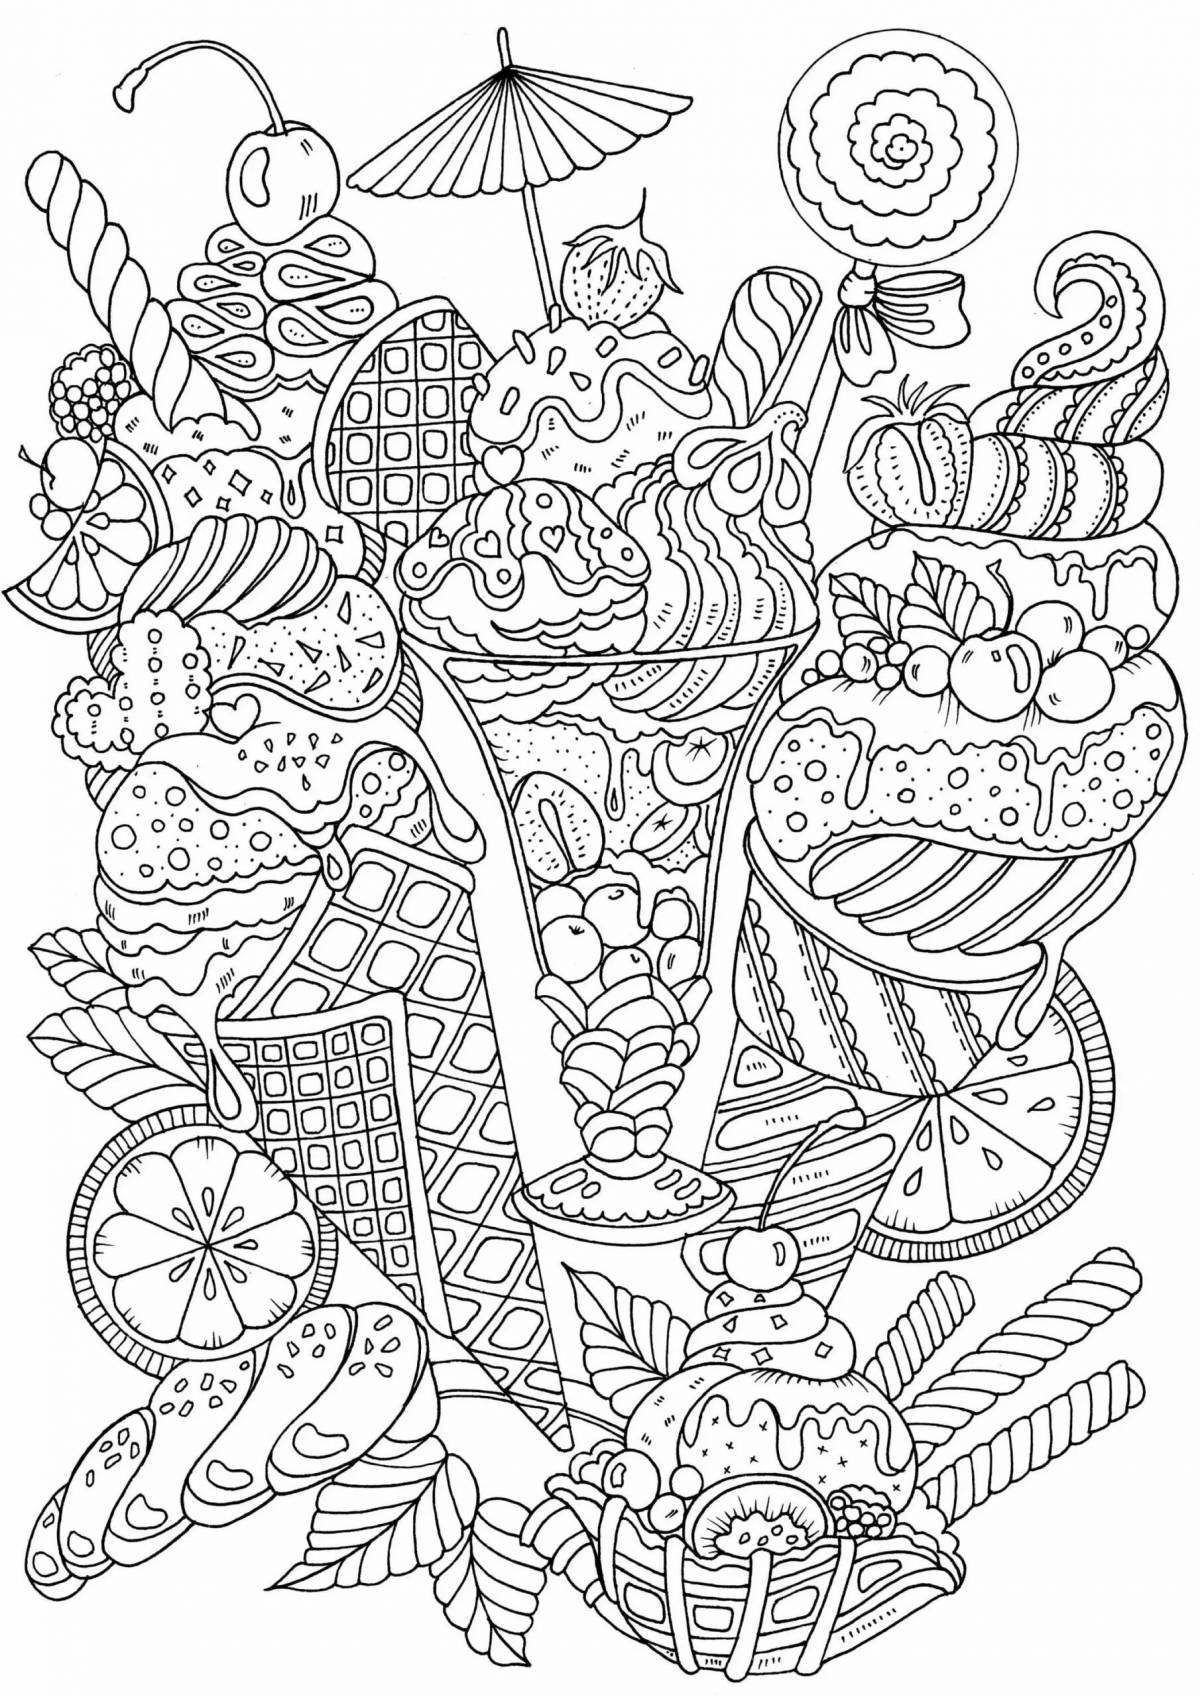 Colorful simple coloring book for adults